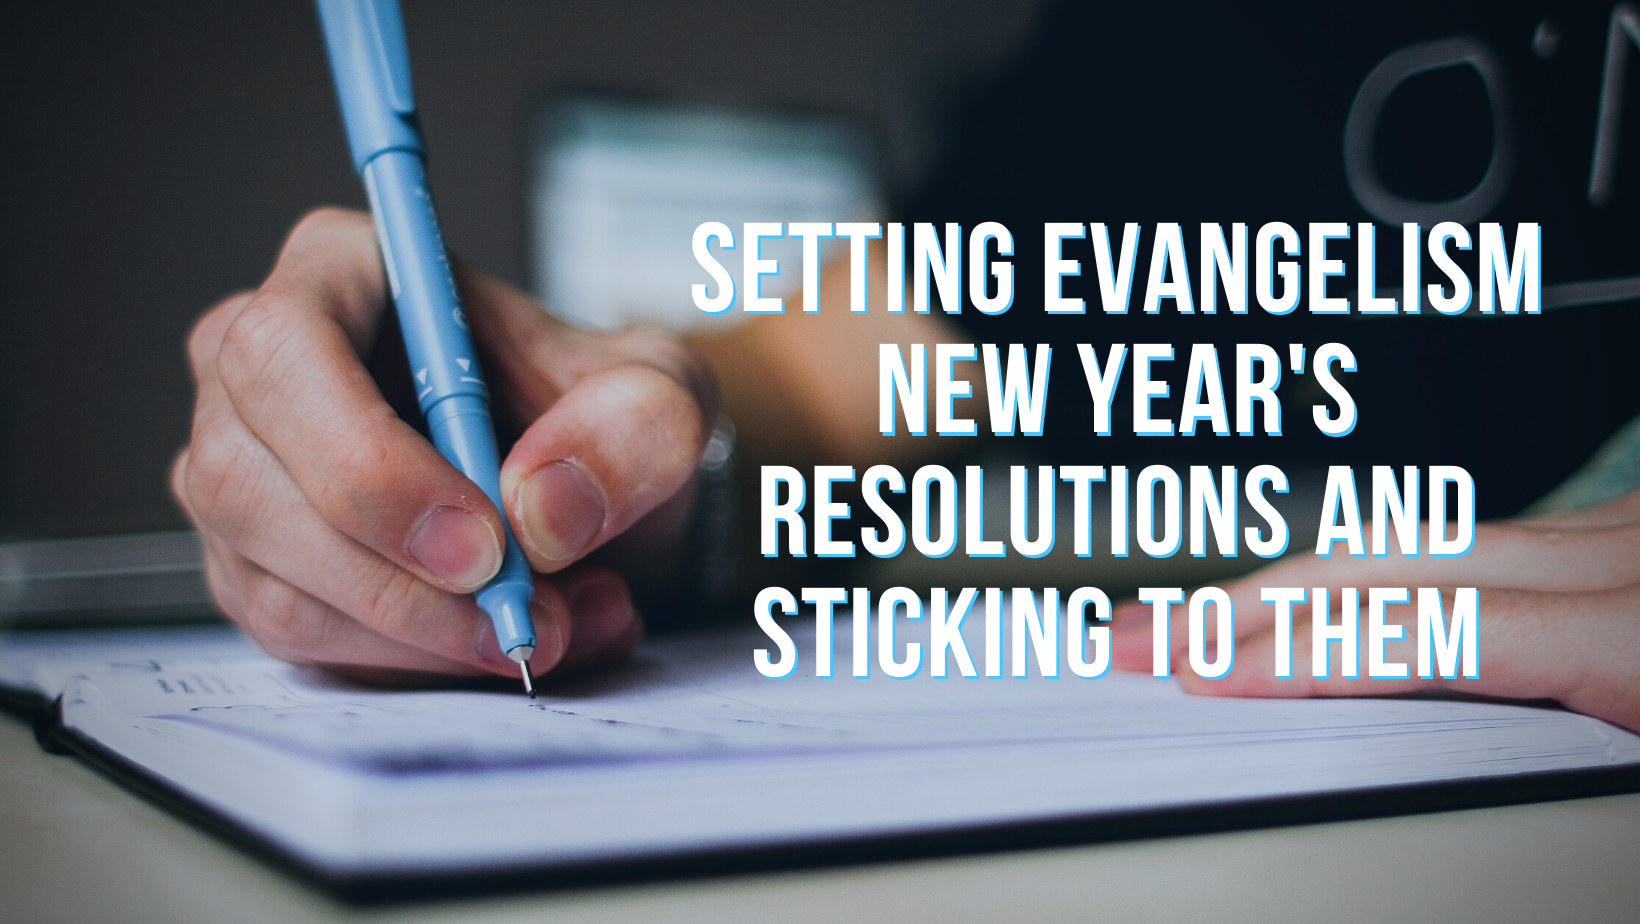 Setting evangelism New Year's resolutions AND sticking to them